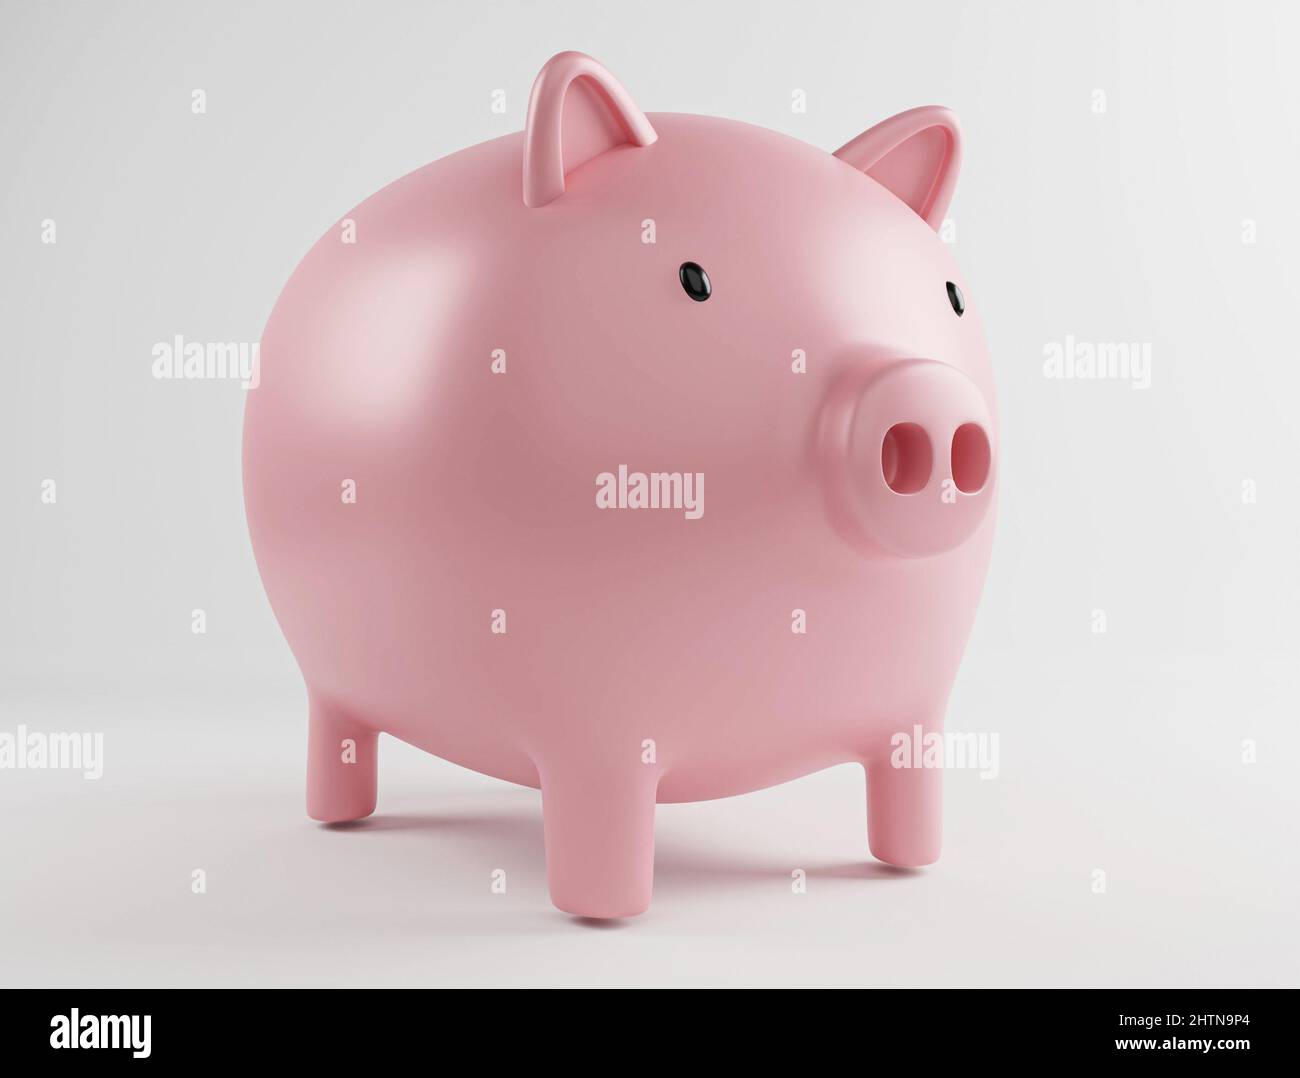 Pink piggy bank on white background. 3d rendering illustration. Stock Photo